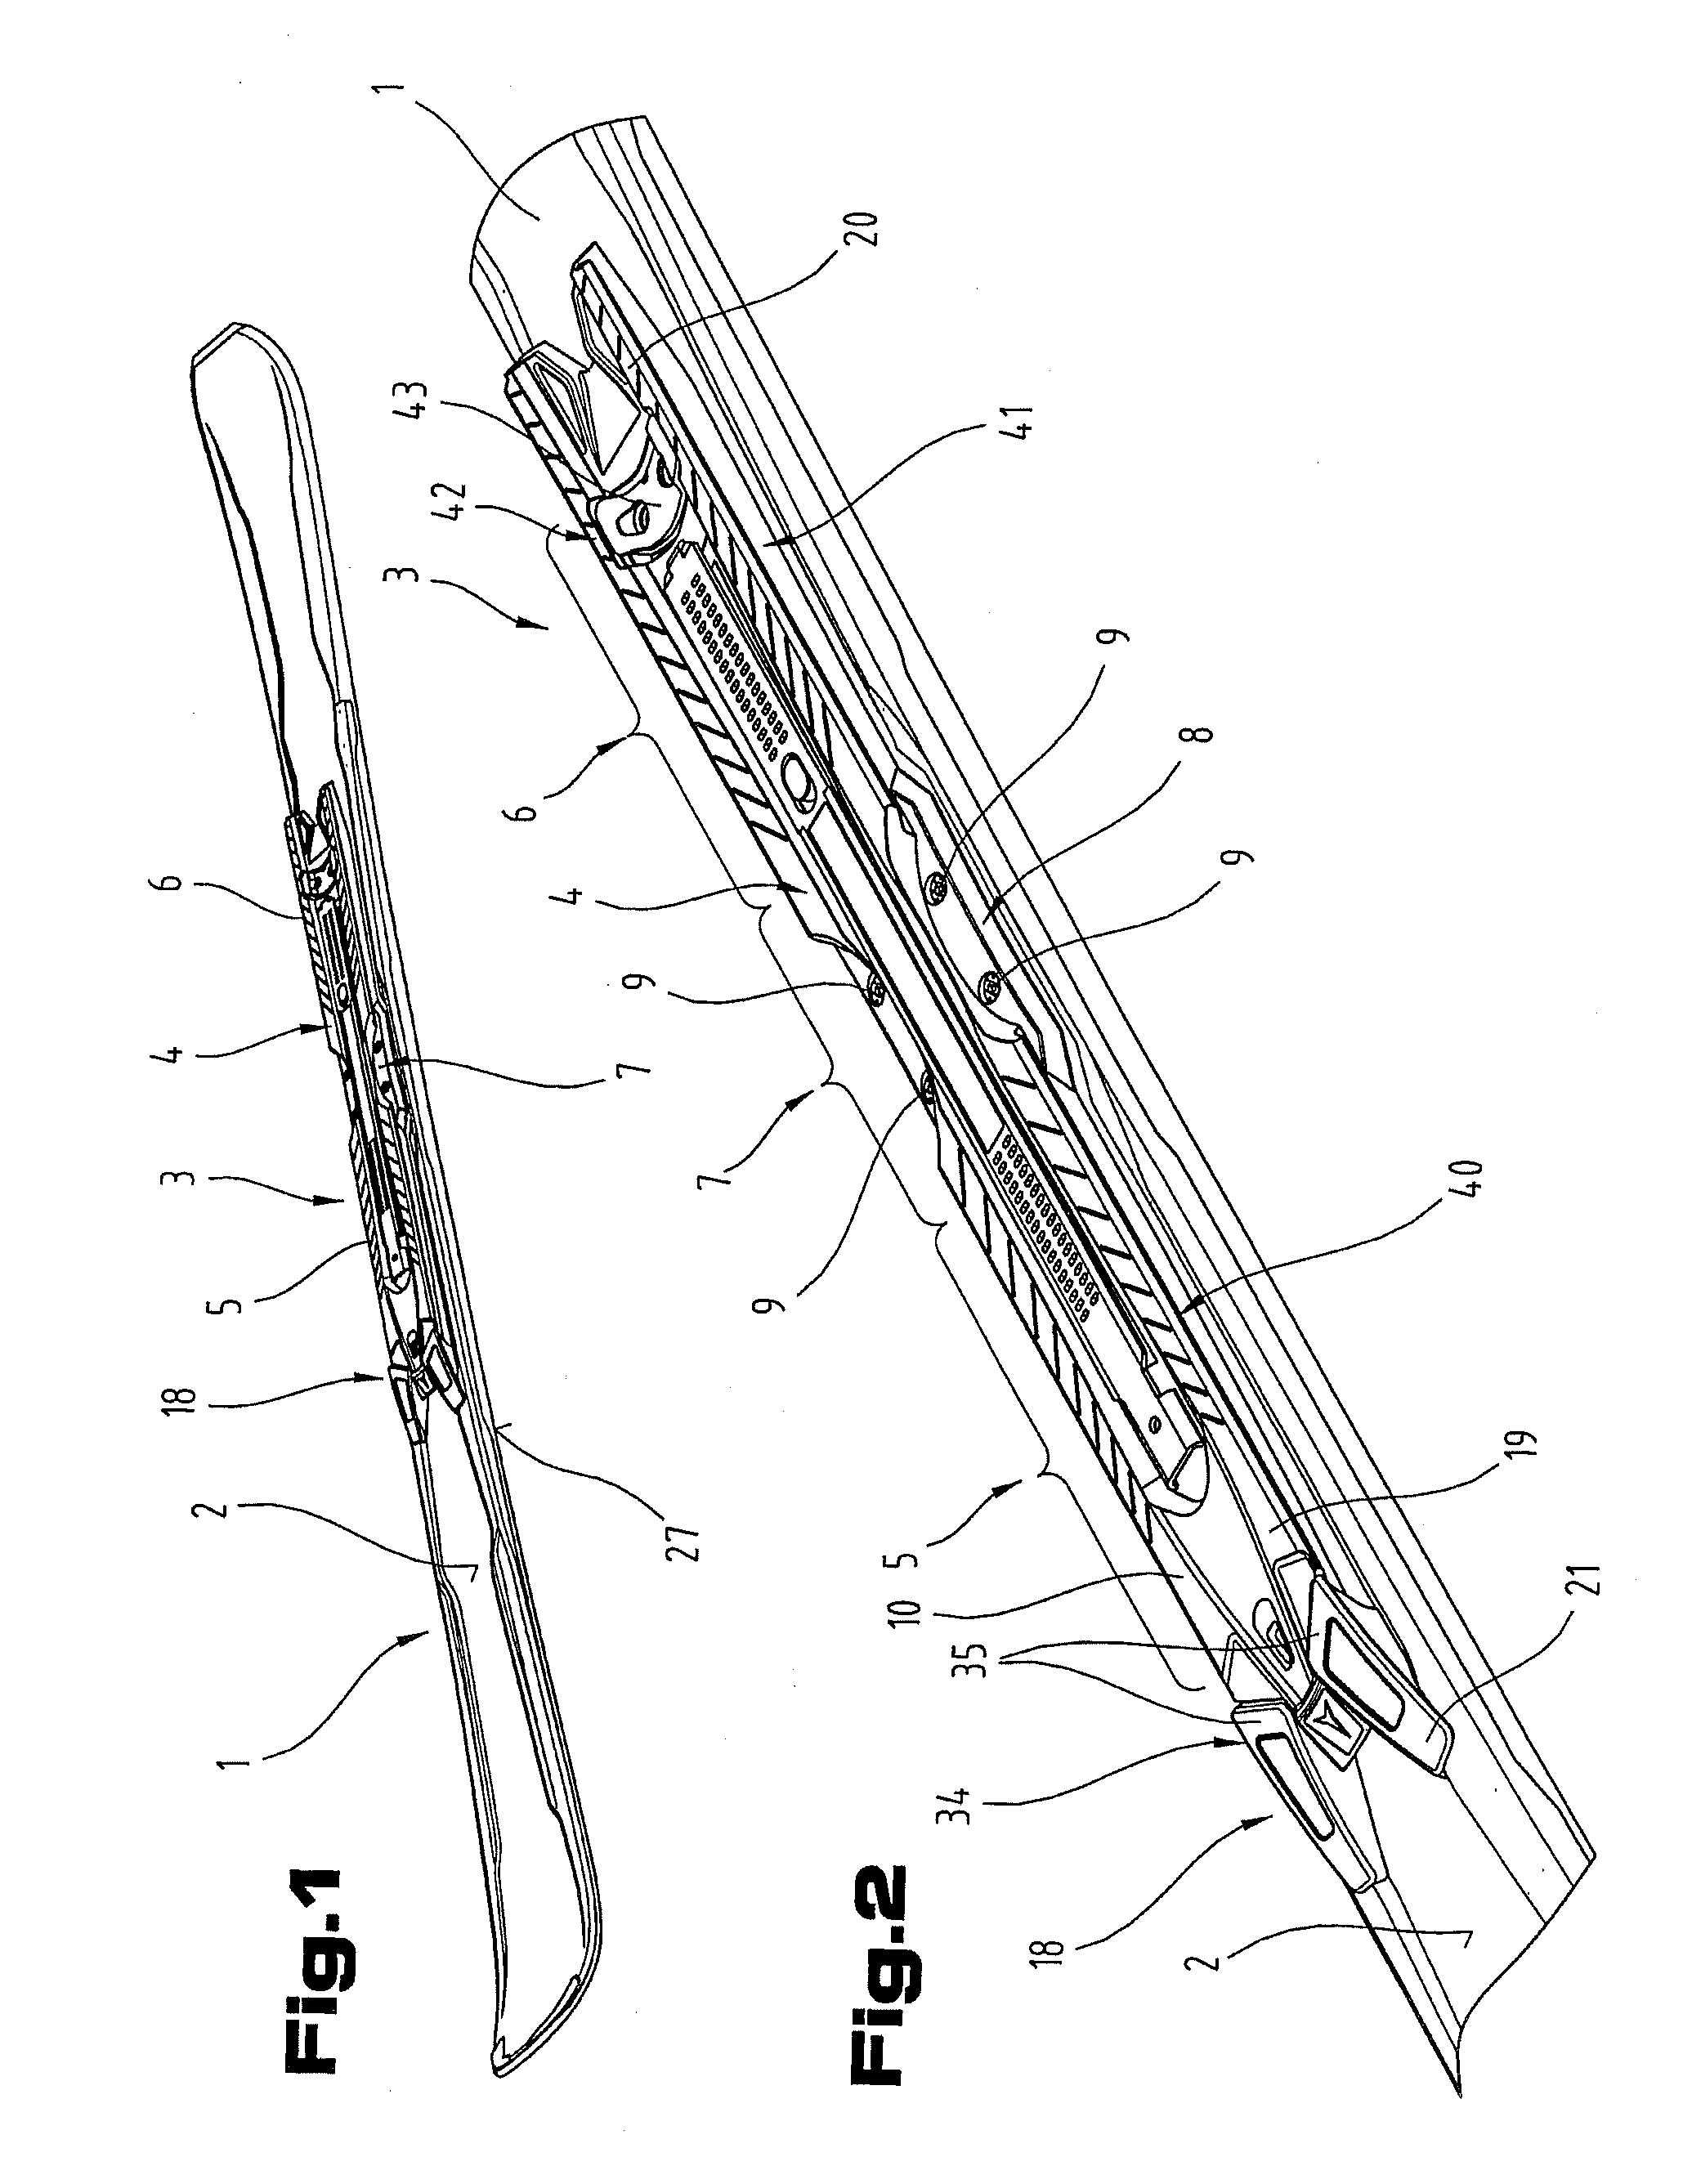 Ski with a connecting device for a ski binding